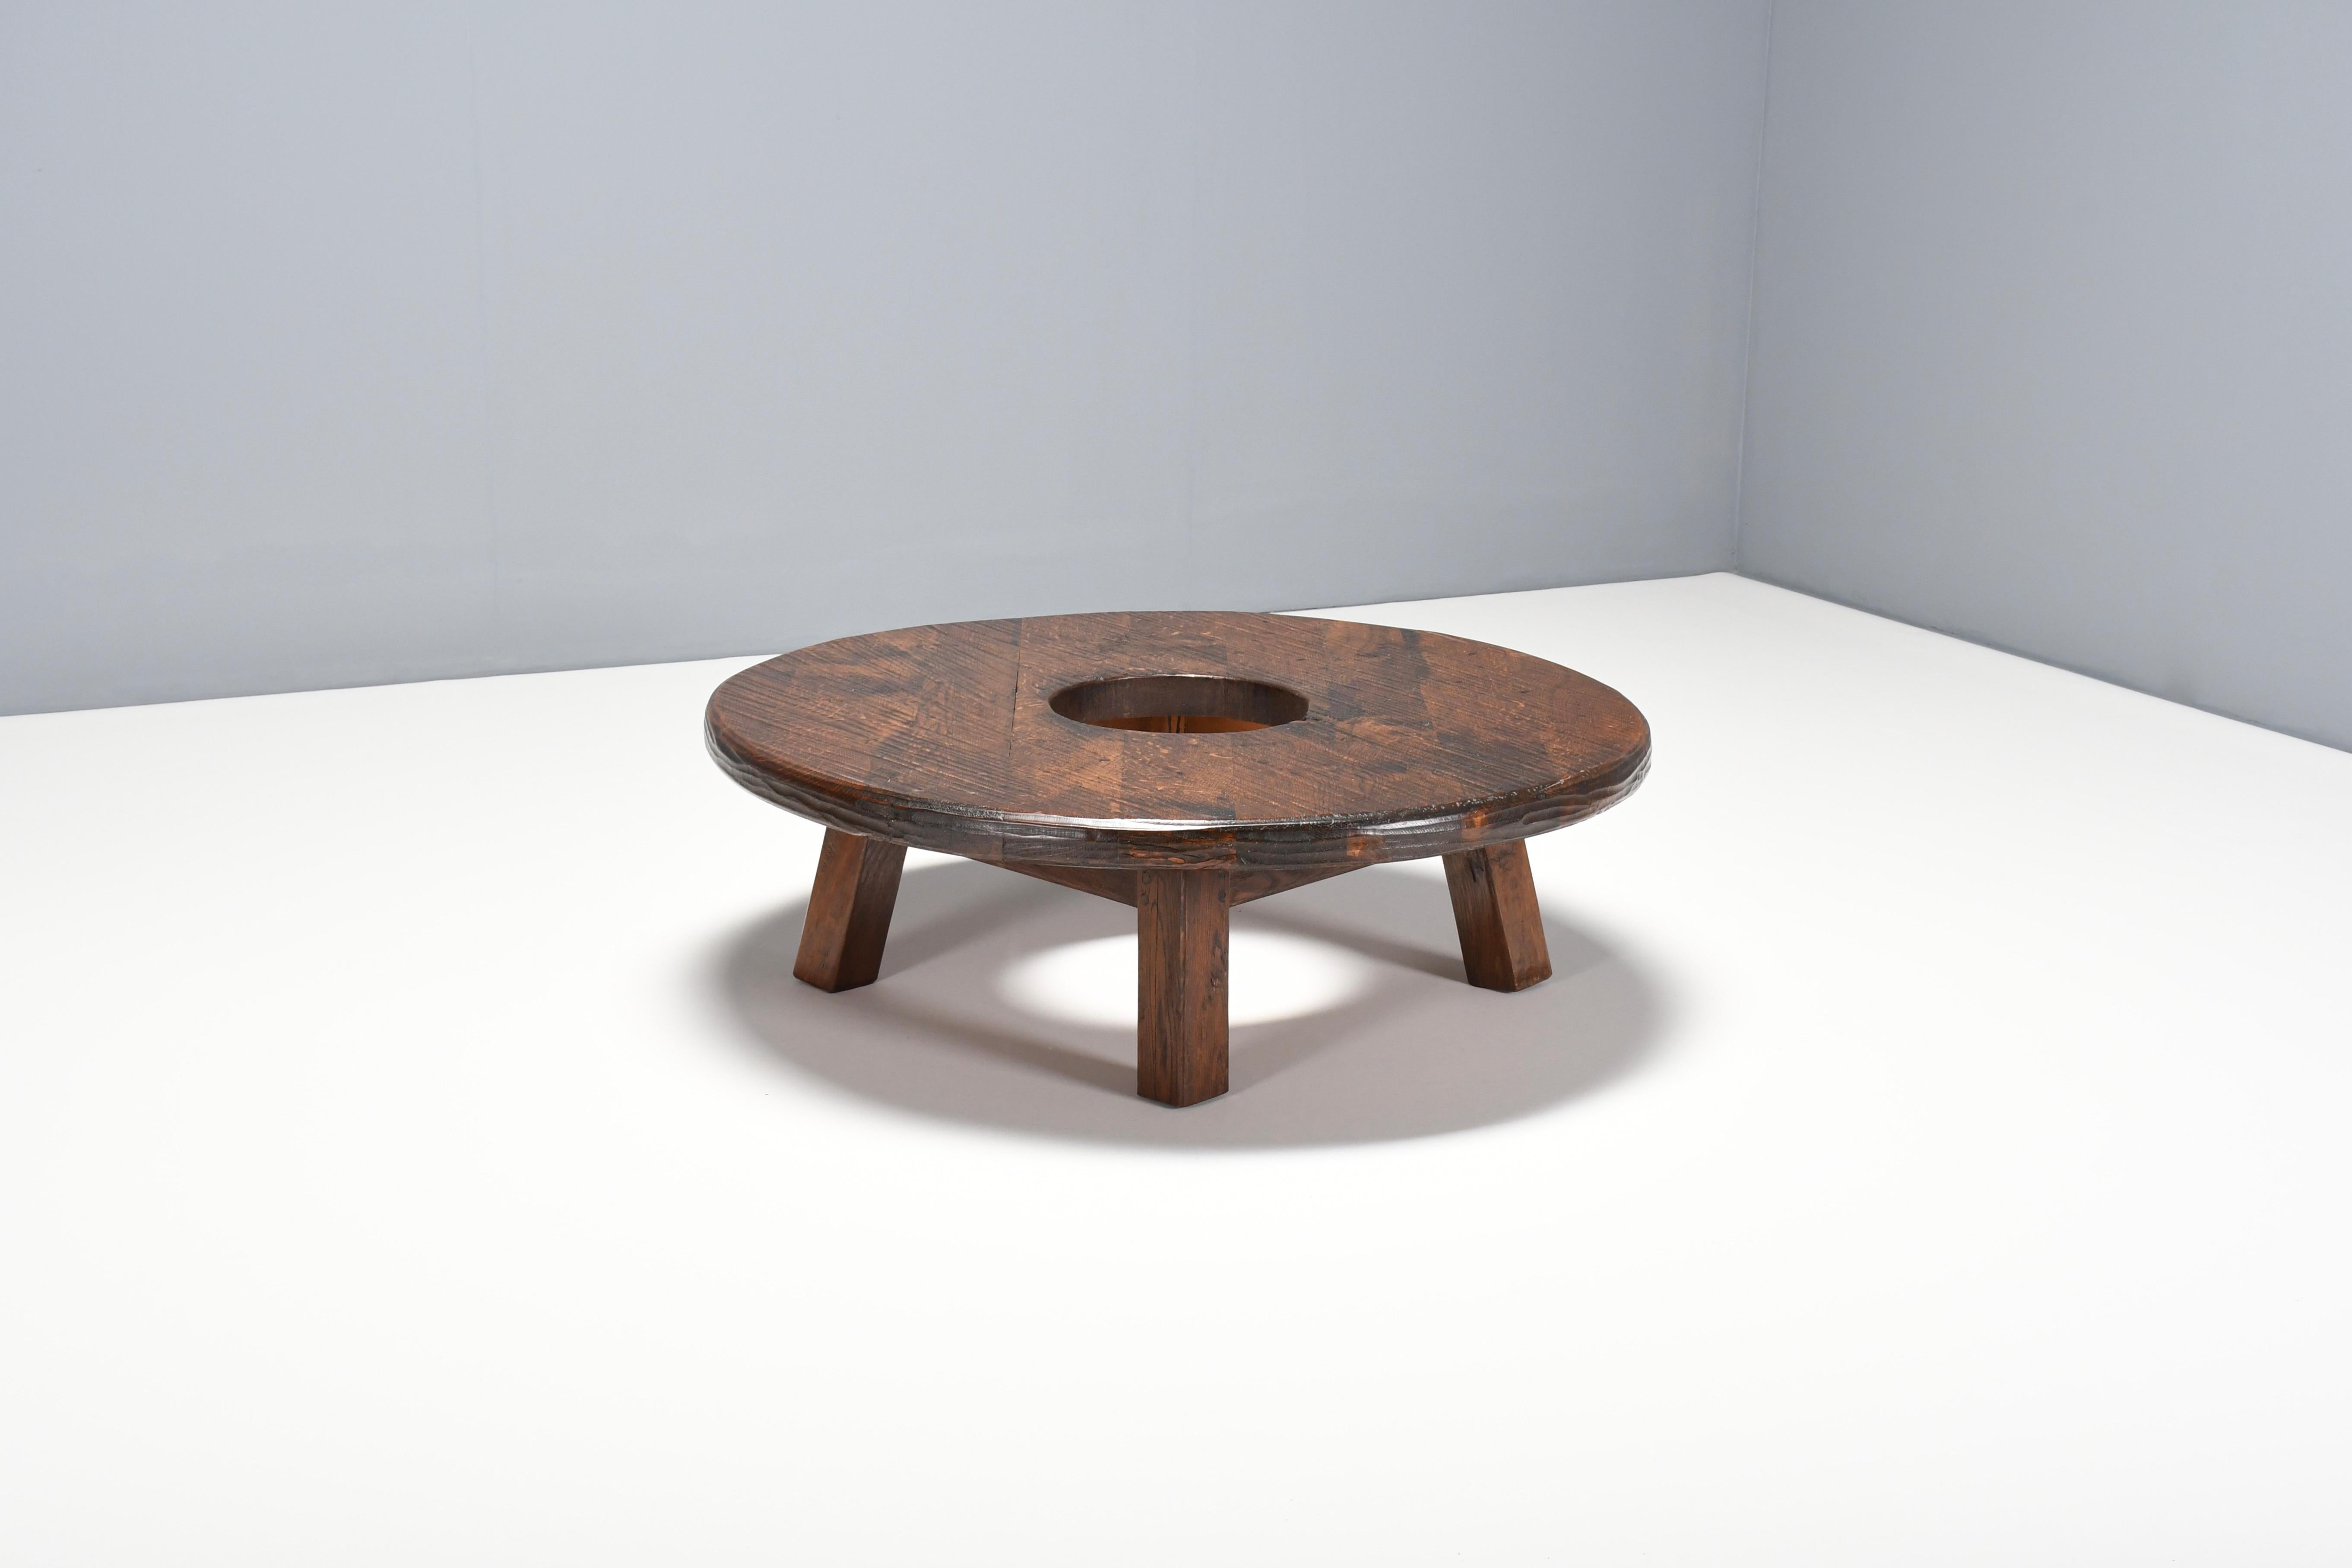 Impressive handmade coffee table in very good original condition. 

The table is made of solid French oak. 

The thick round top has a beautiful warm color, and has visible wooden joints which connects the base.

The base is also made of solid oak